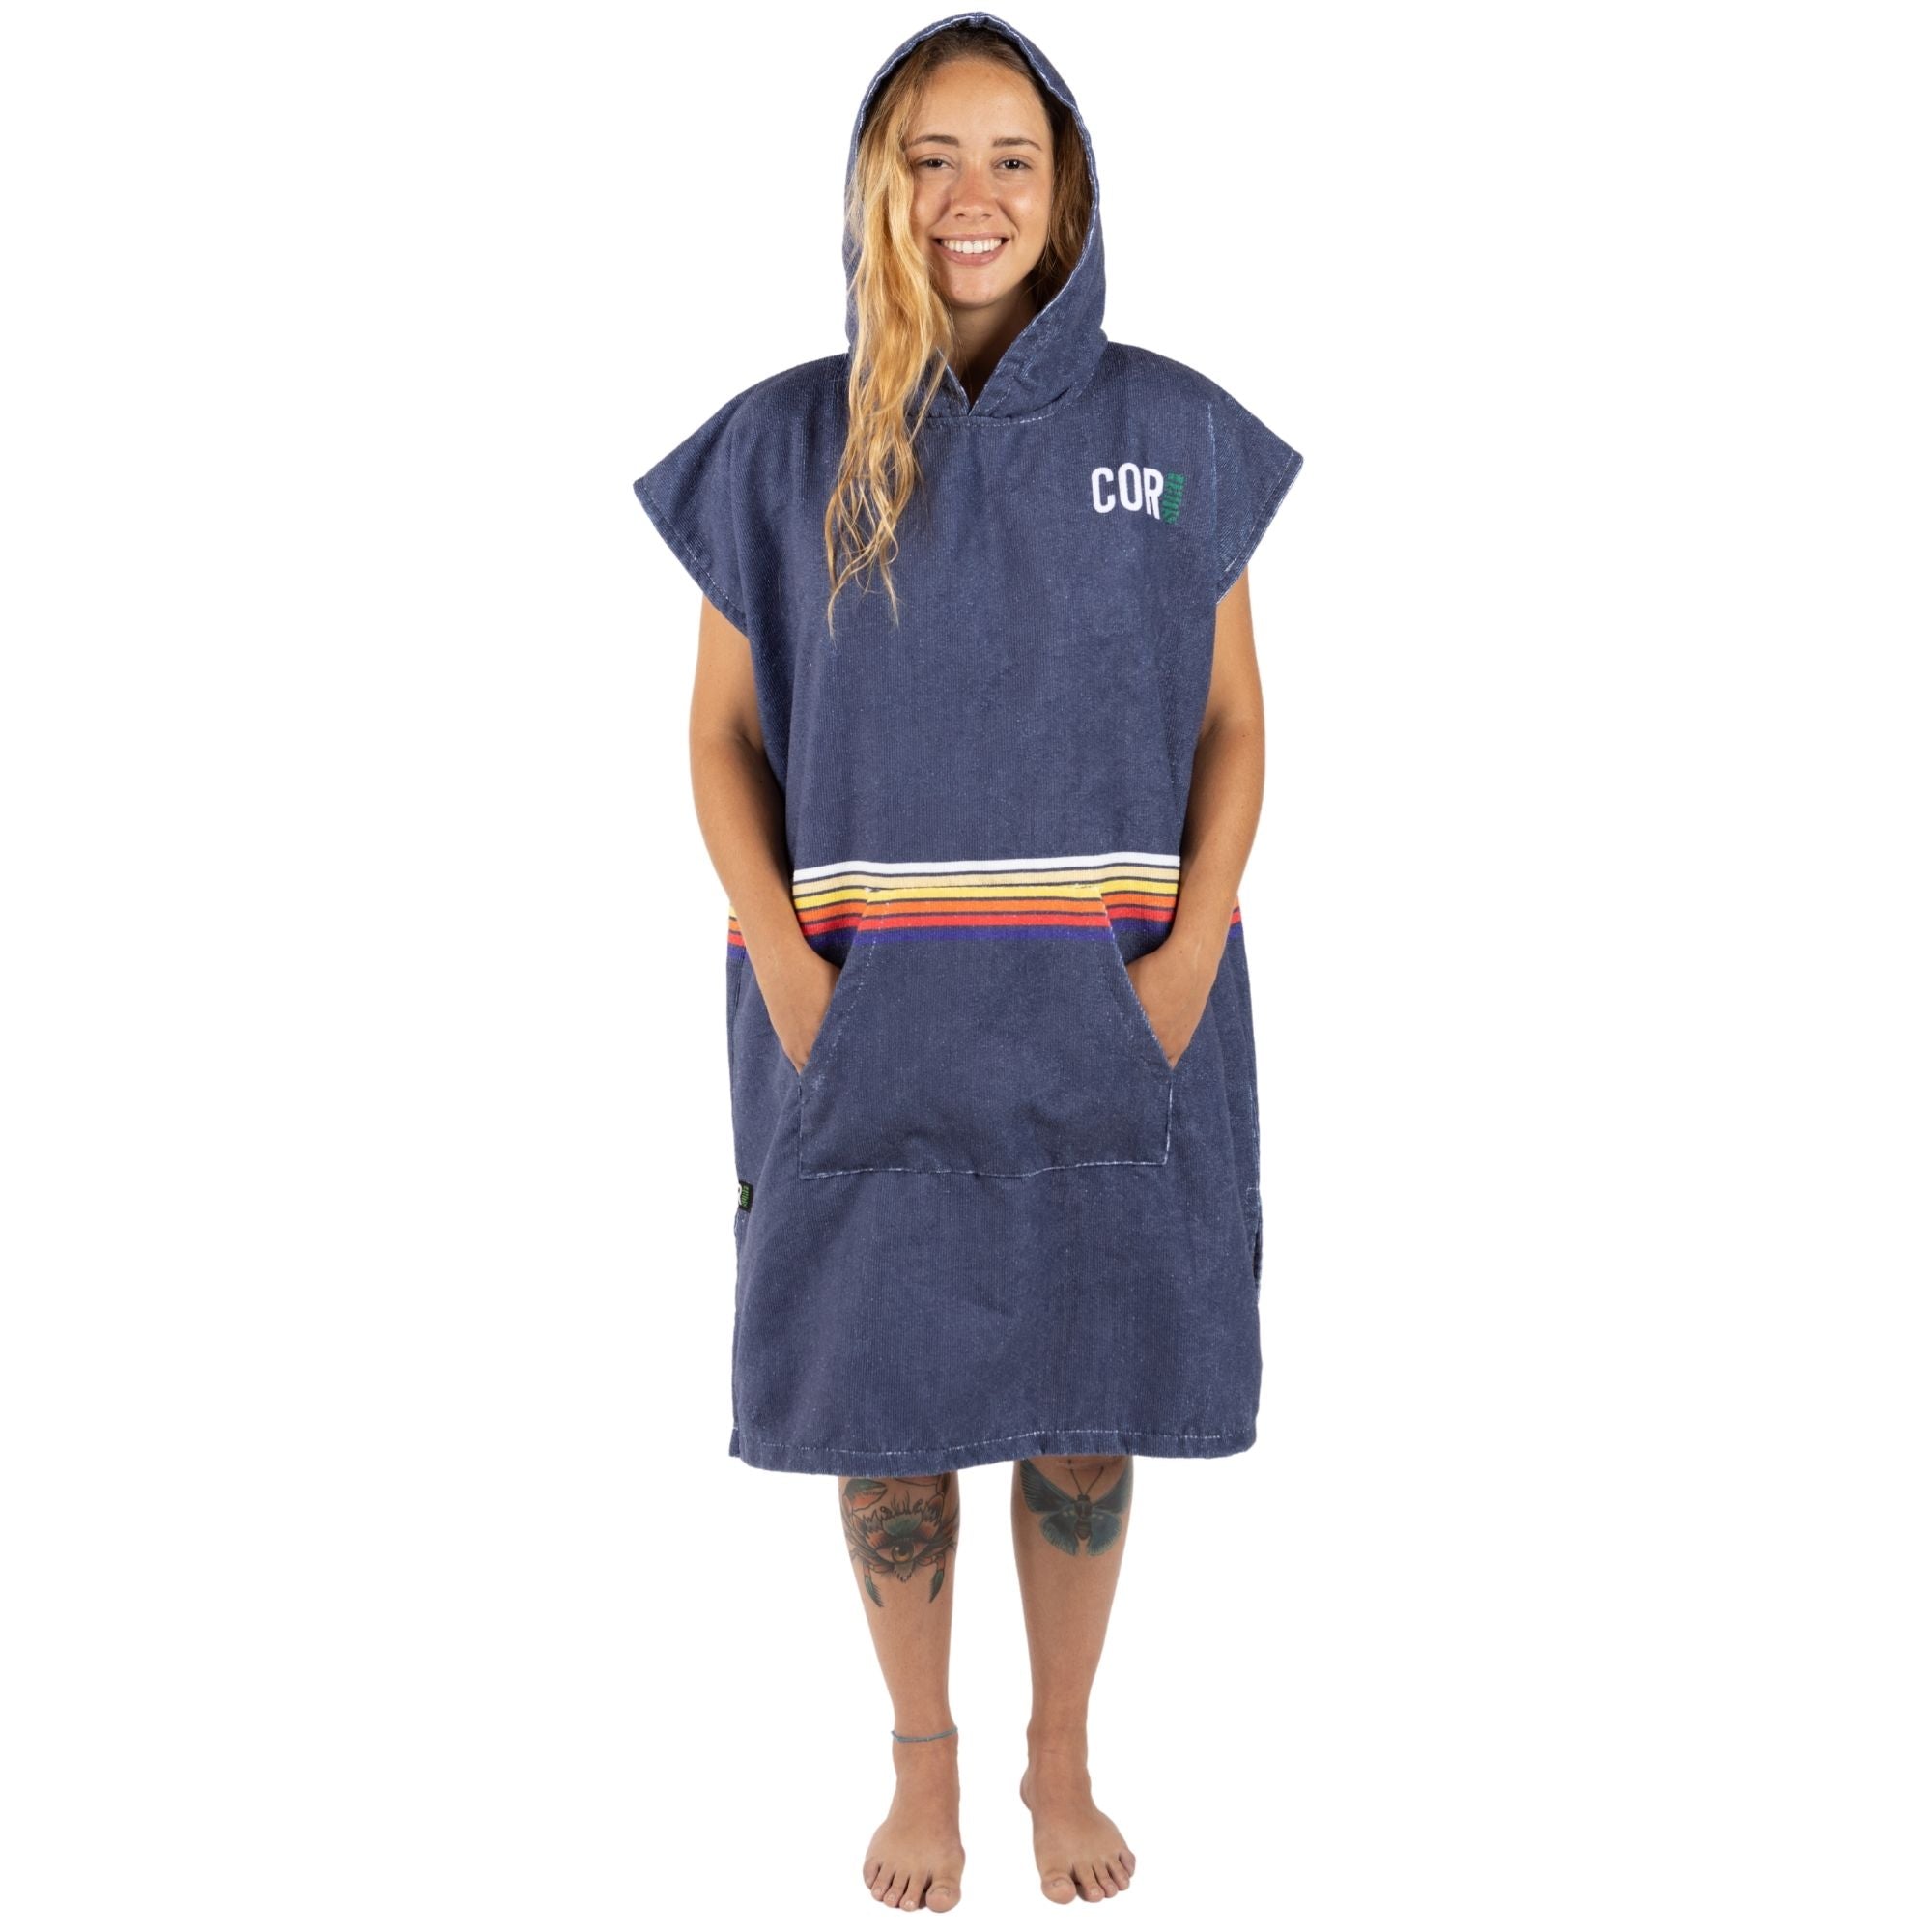 – Surf - Knight Rider Poncho (Small) Changing Kids COR